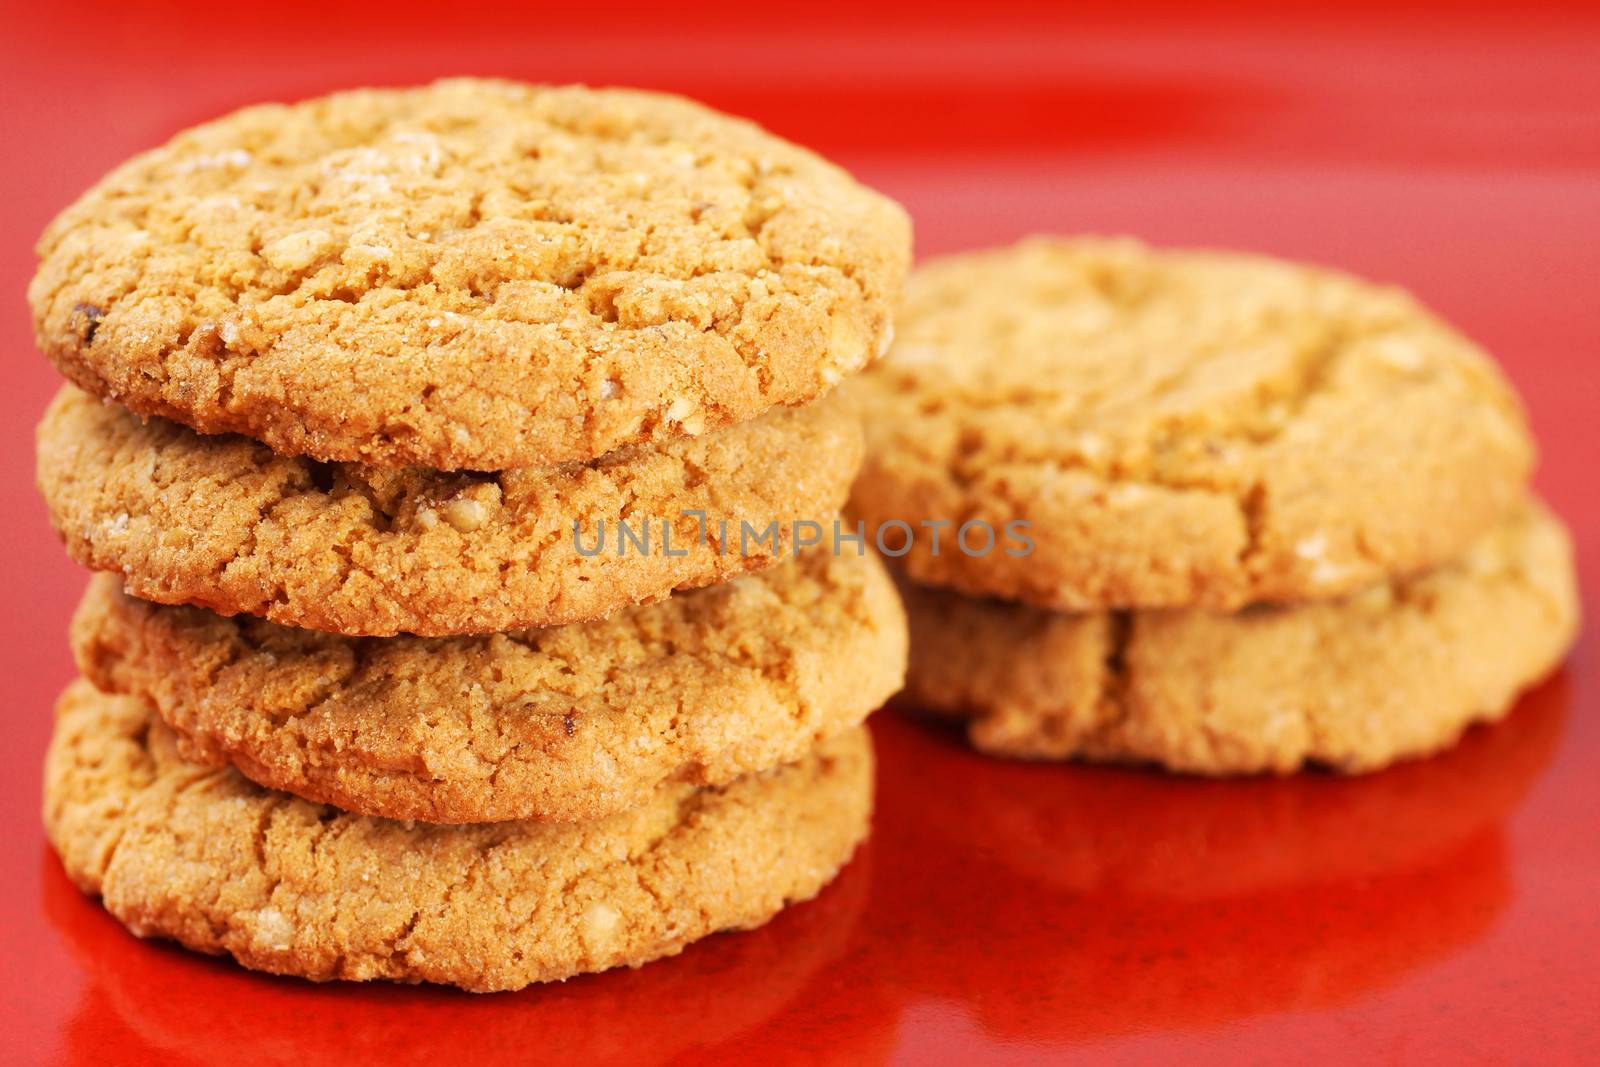 Oatmeal cookies on red plate by Mirage3